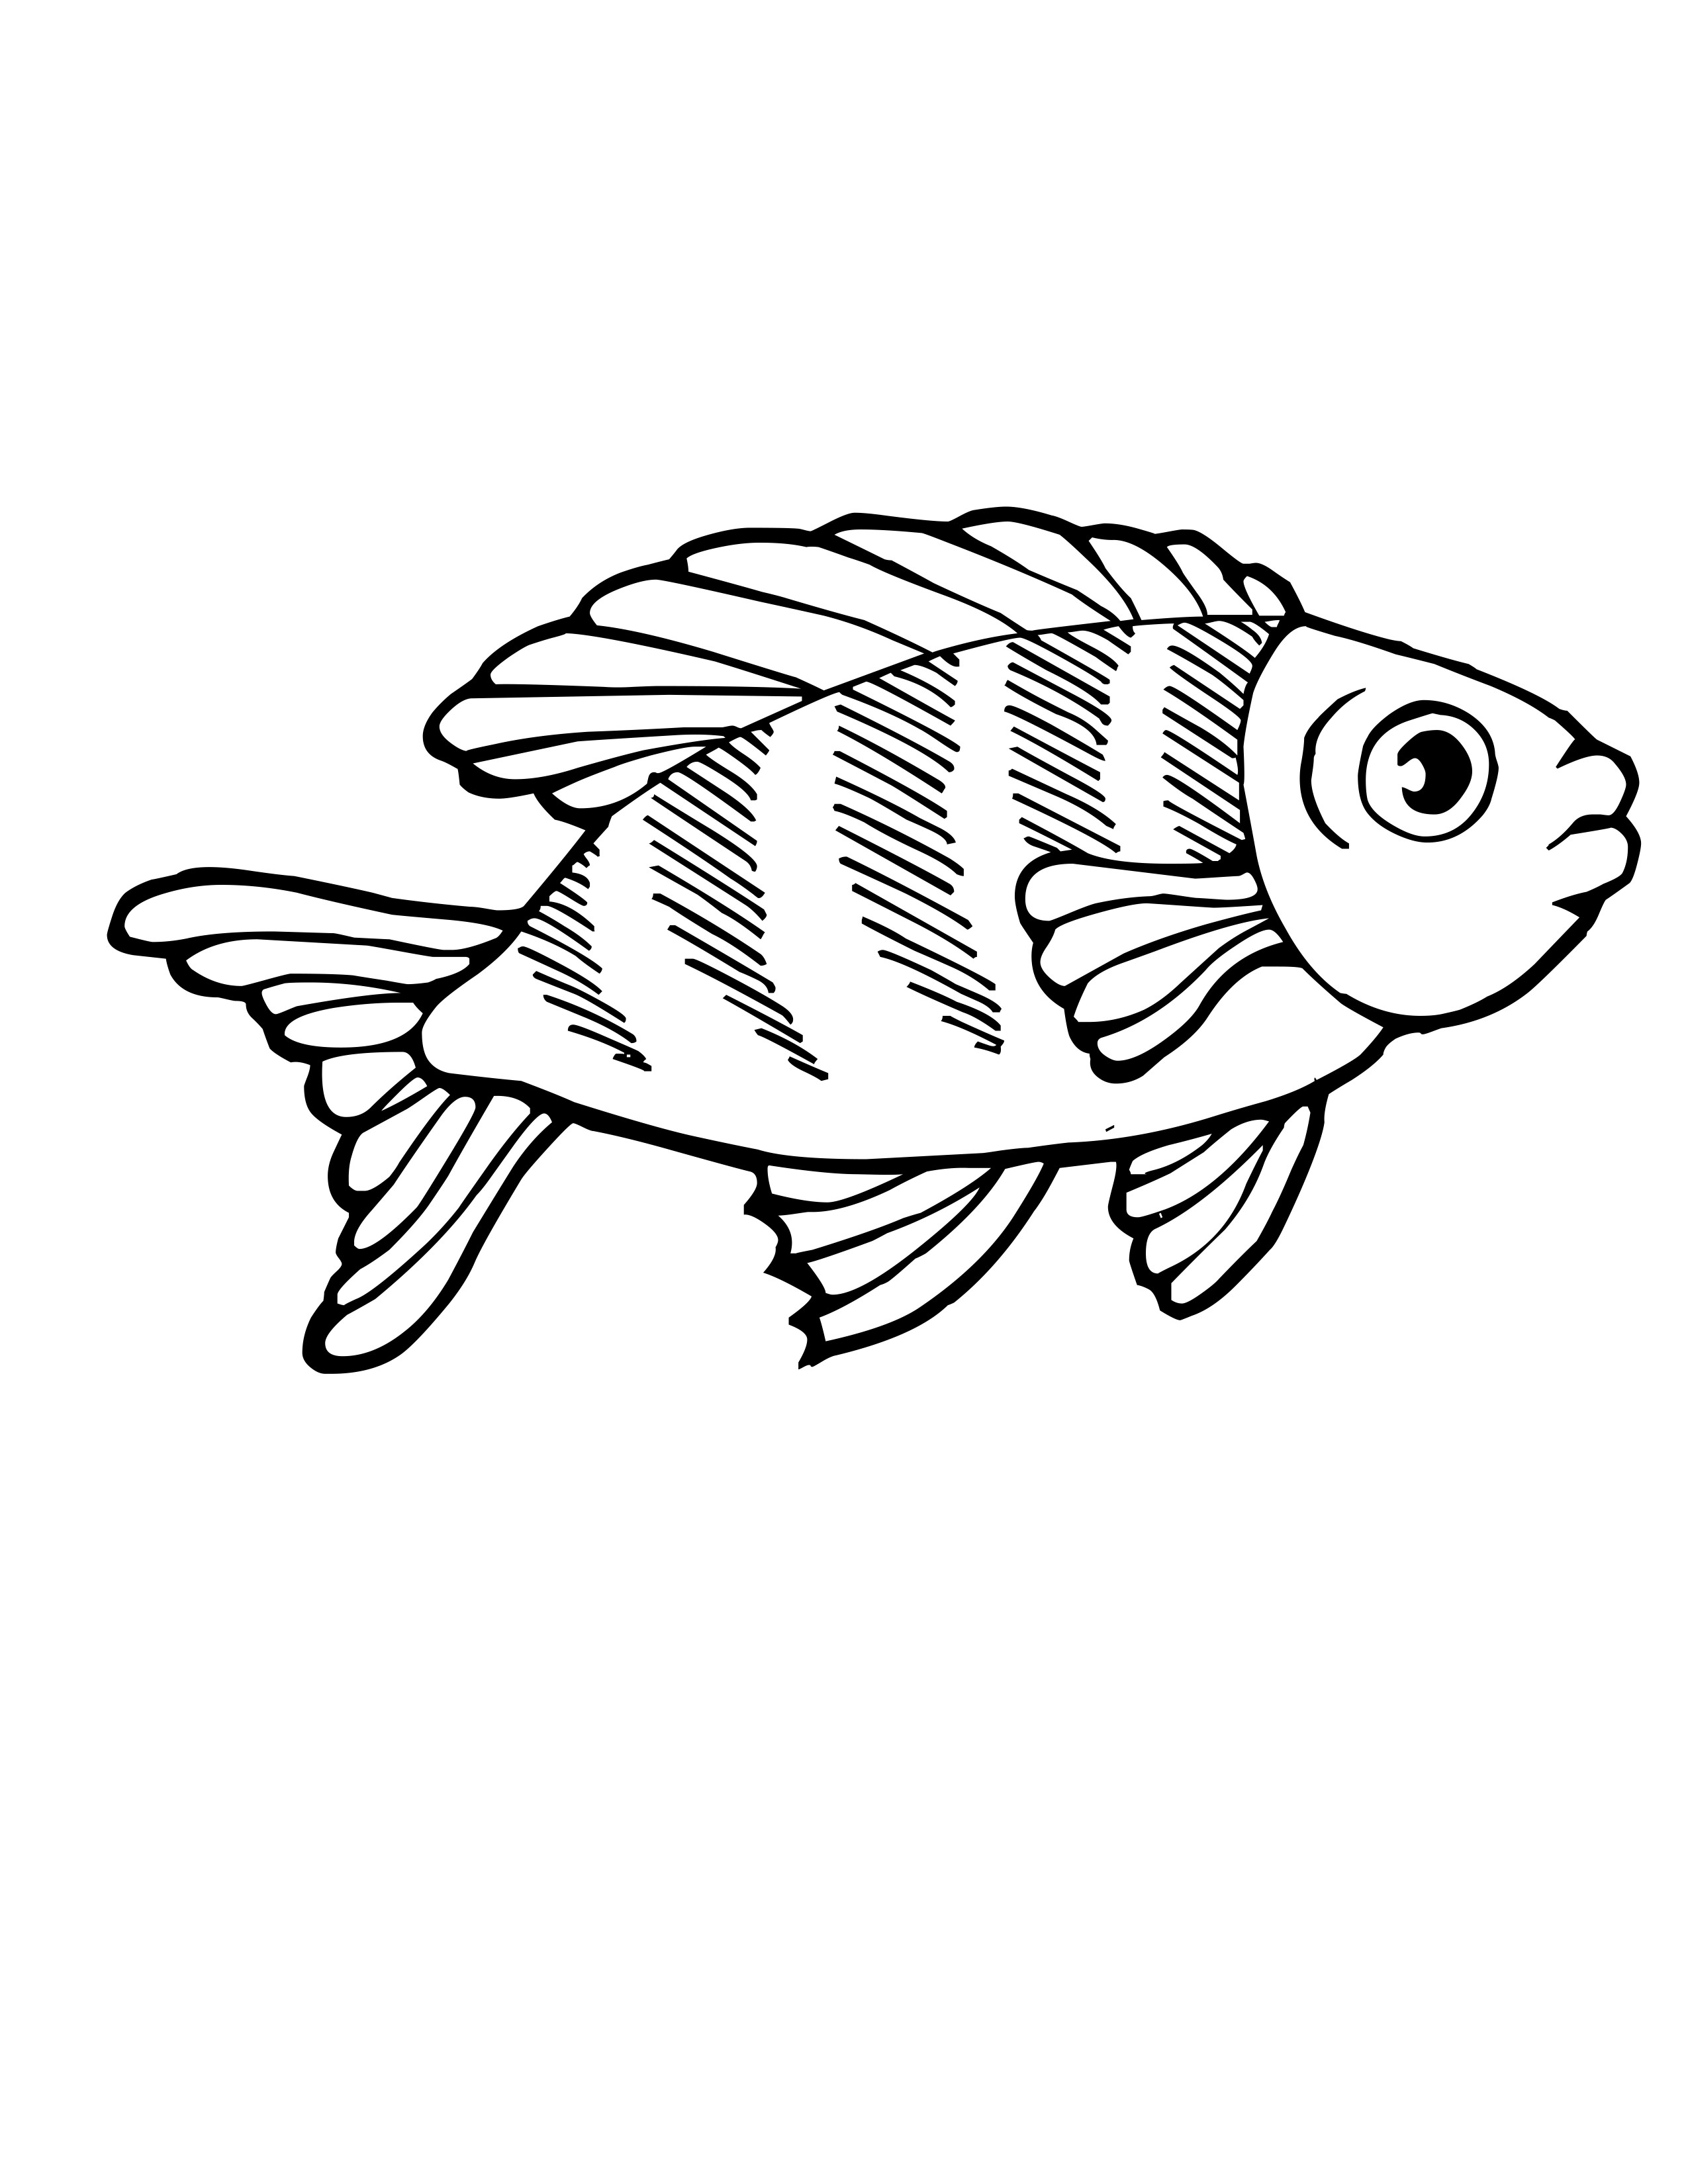 Koi Fish Coloring Page - Clipart library - Clipart library